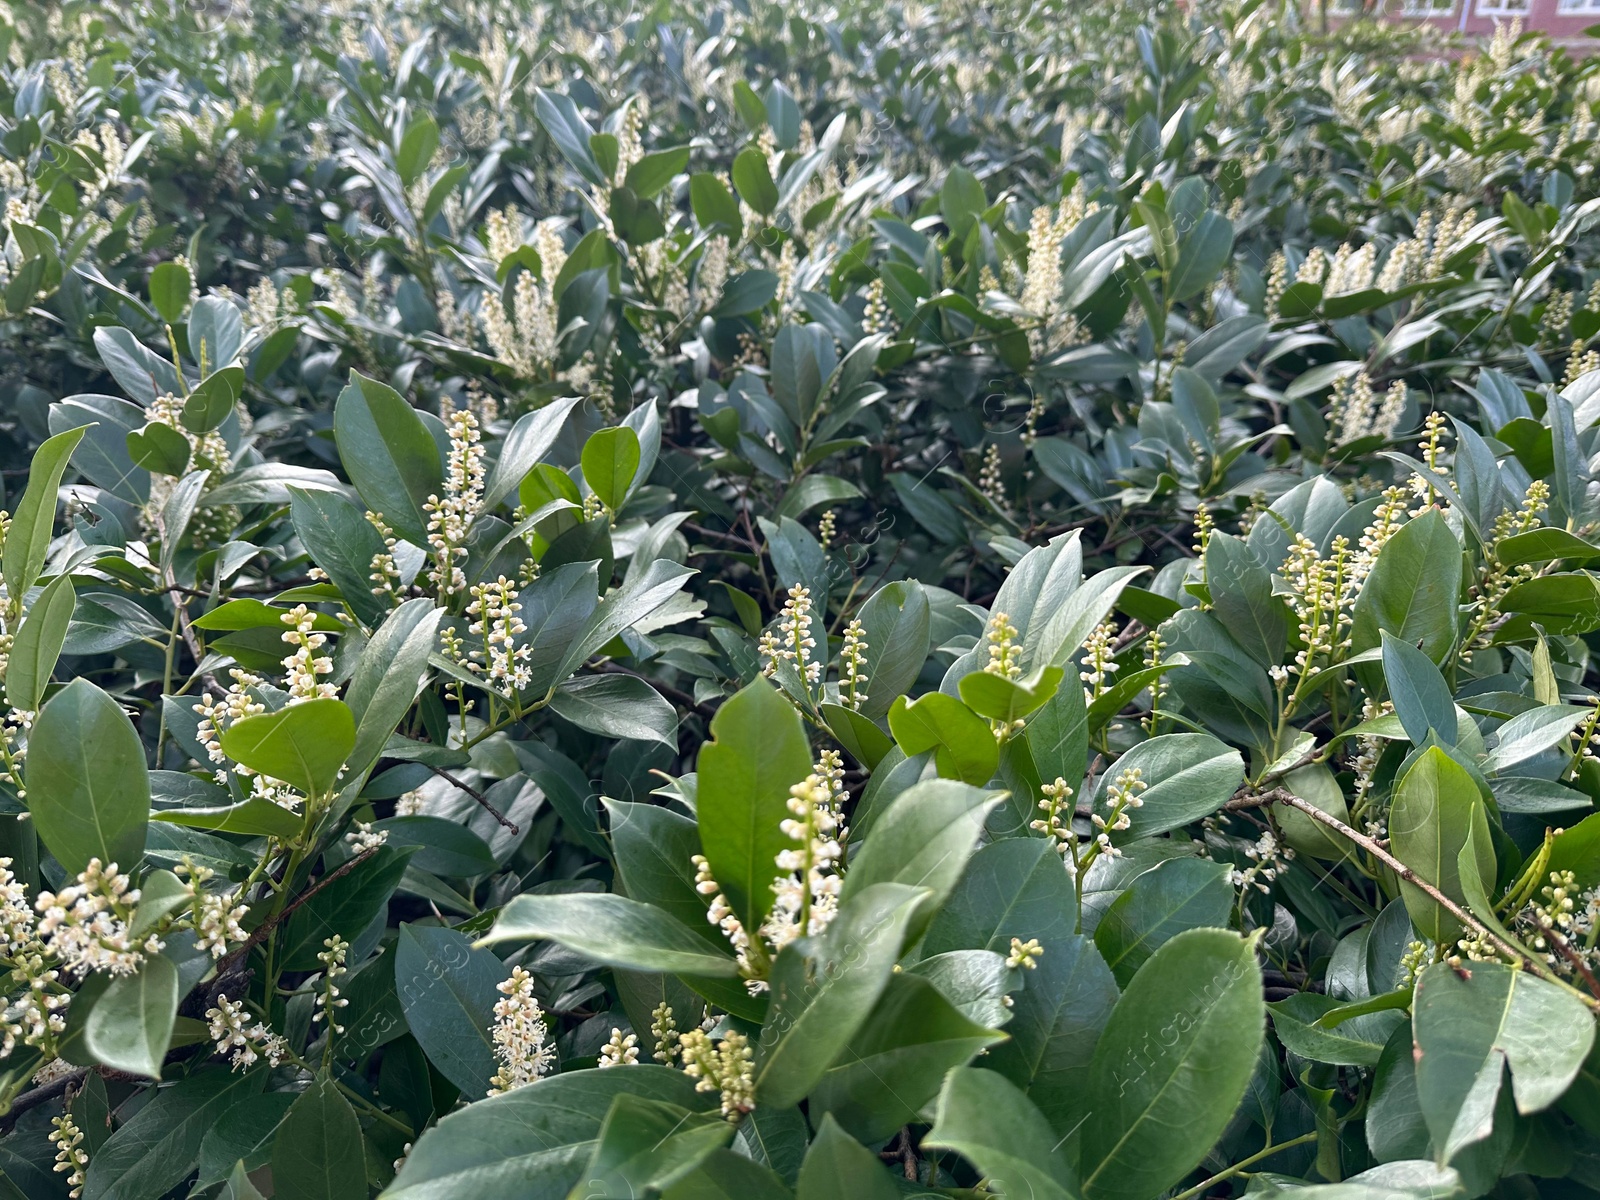 Photo of Cherry Laurel shrubs with white flowers growing outdoors